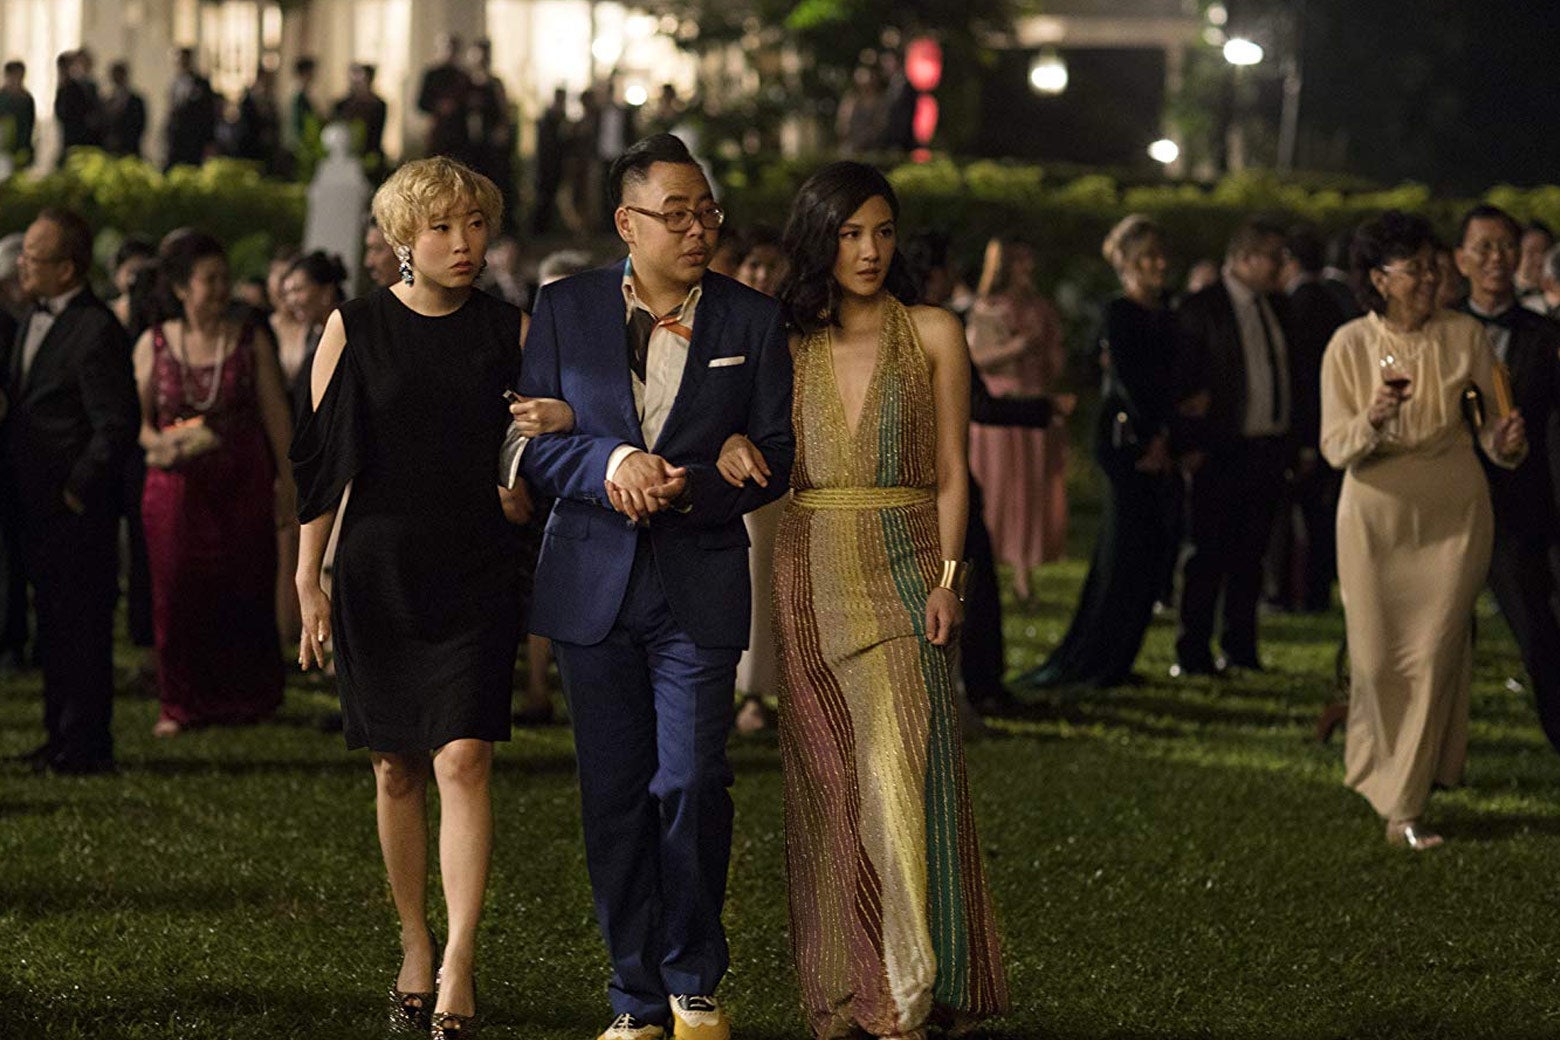 Awkwafina, Nico Santos, and Constance Wu wander the yard of a party in this still from Crazy Rich Asians